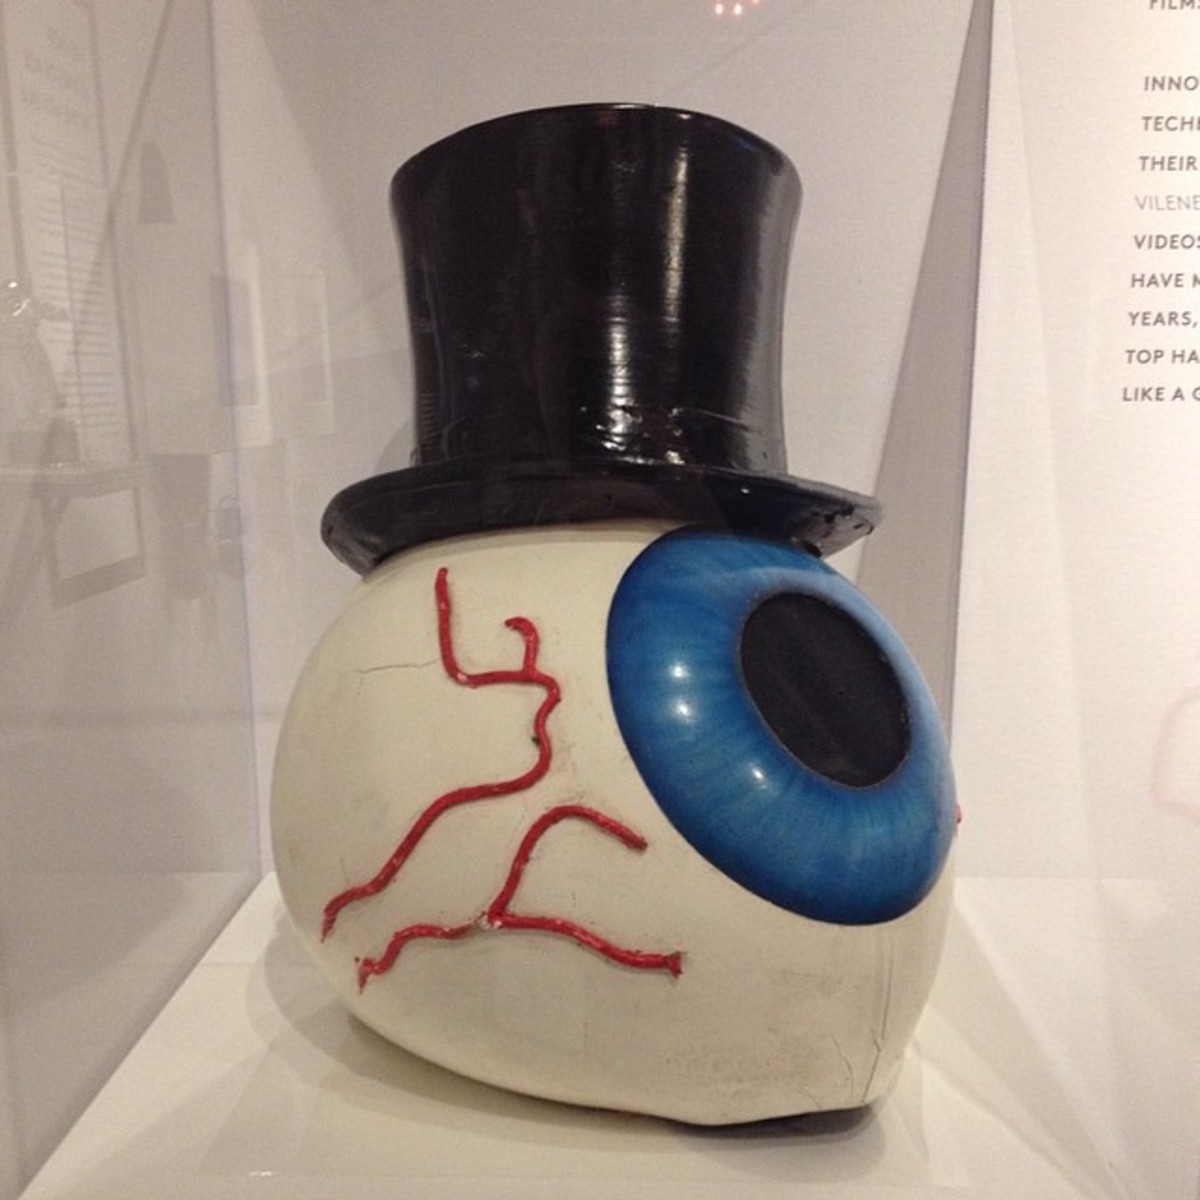 An eyeball helmet that was used by the Residents on exhibit at the EMP in Seattle, Washington. 